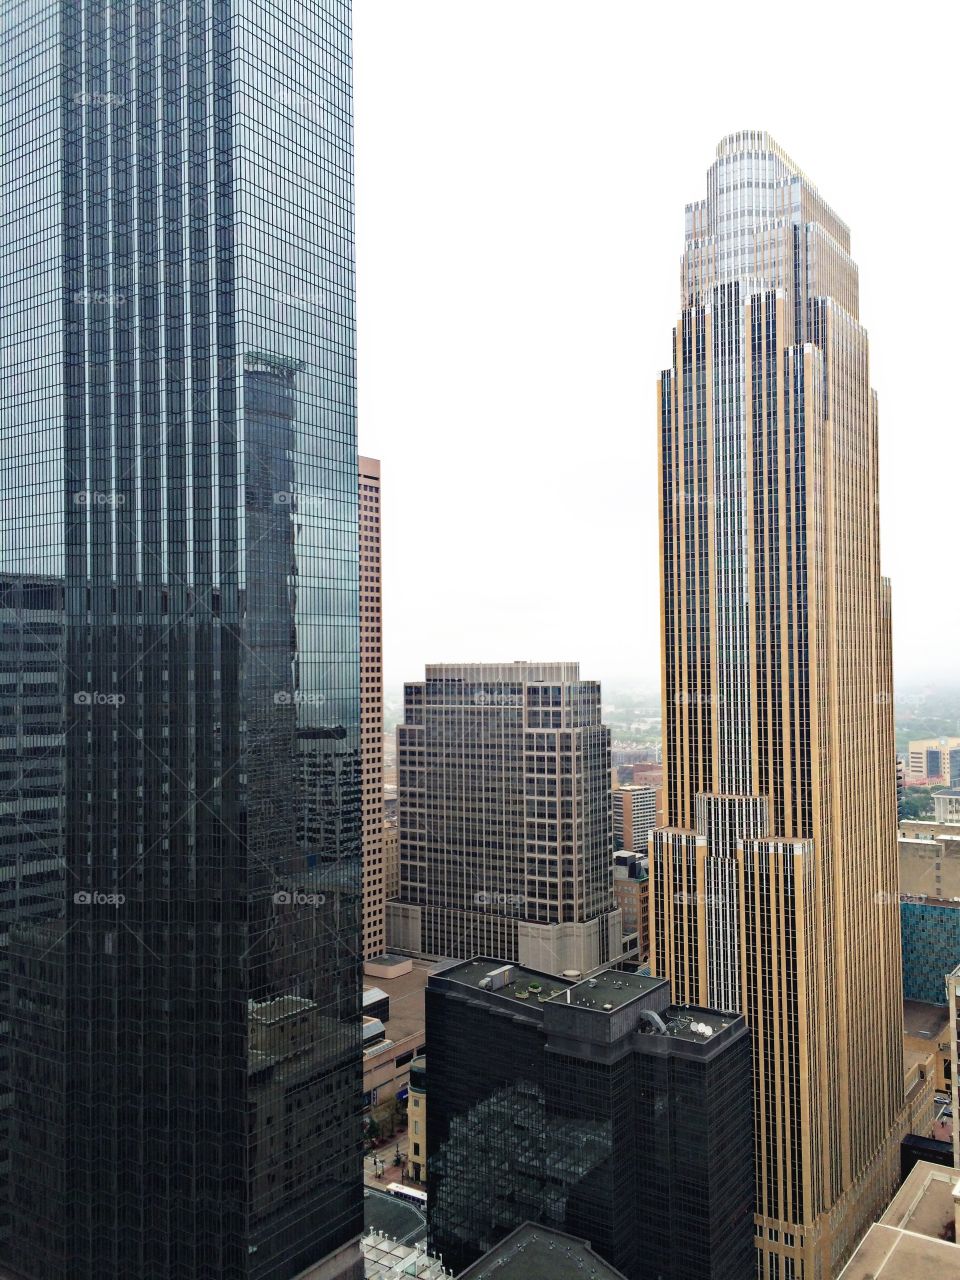 Observe.. I was on the observation deck of Minneapolis' Foshay Tower